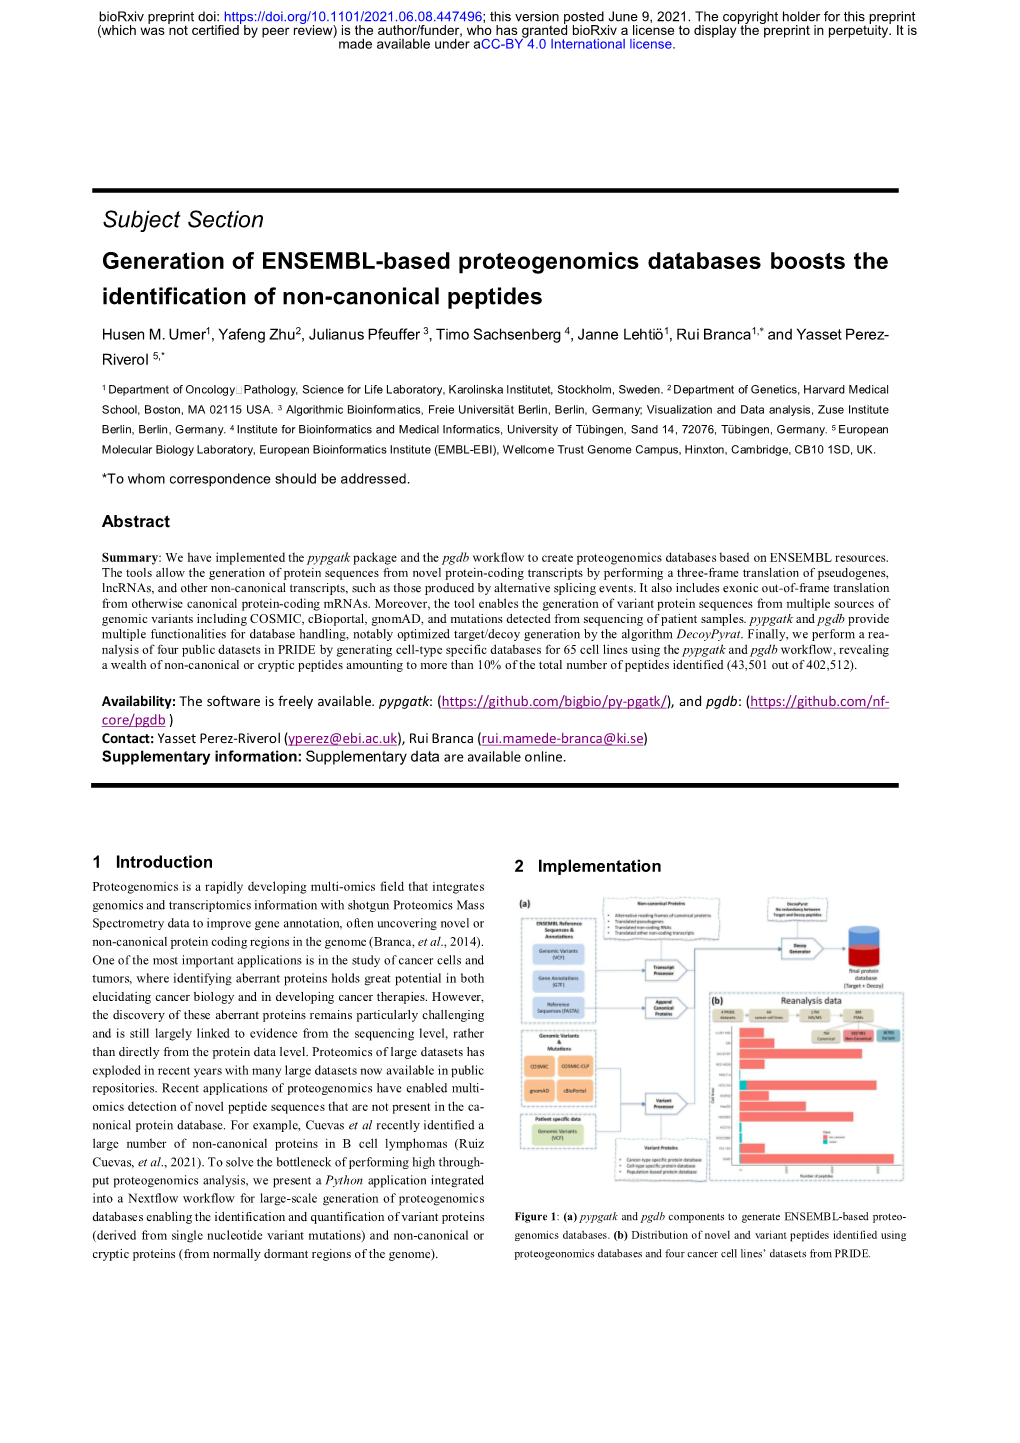 Generation of ENSEMBL-Based Proteogenomics Databases Boosts the Identification of Non-Canonical Peptides